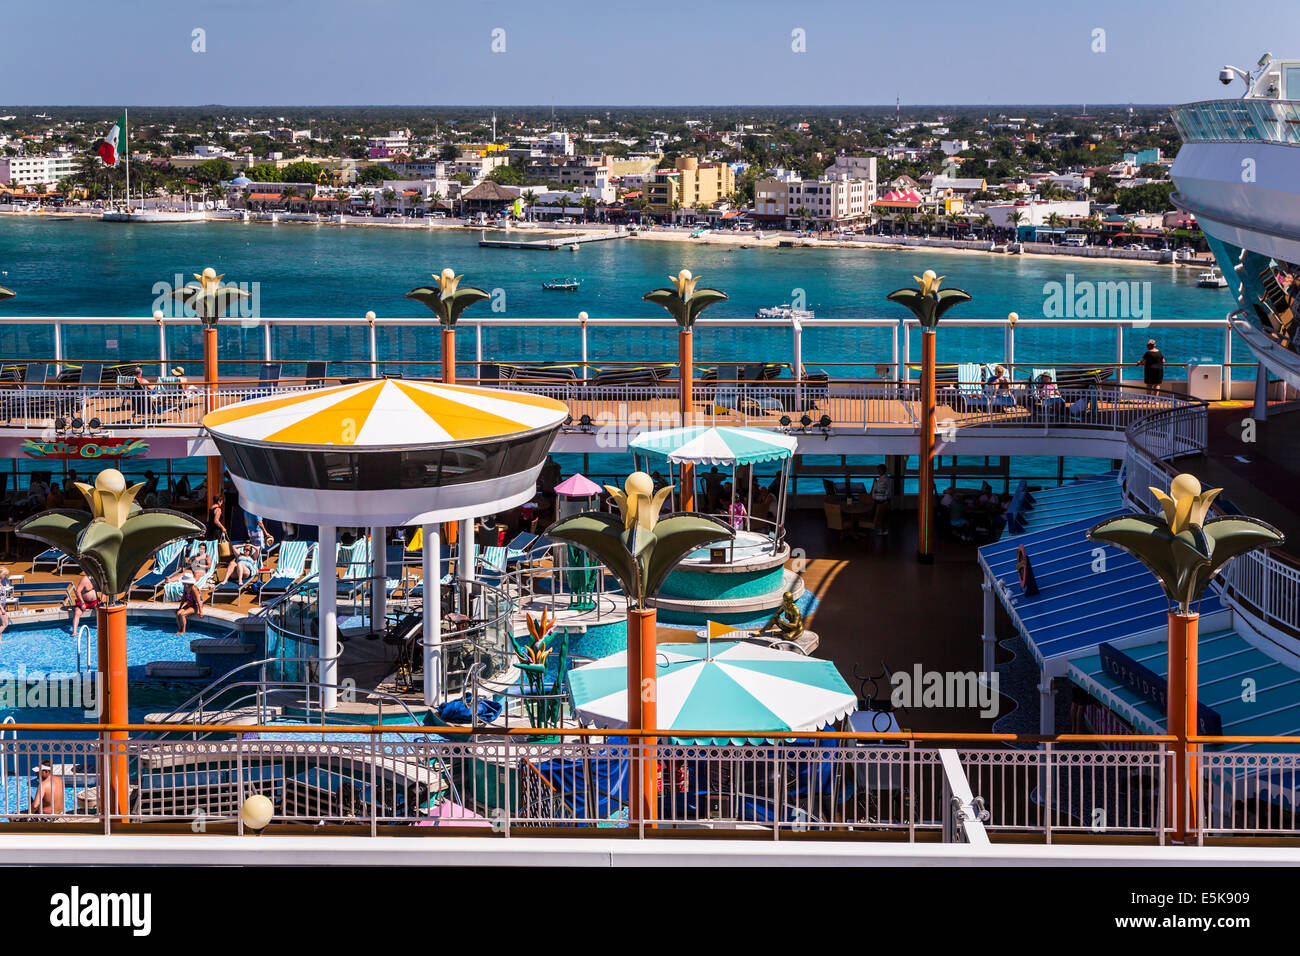 The pool deck of the Norwegian Dawn cruise ship in the port of Cozumel, Mexico. Stock Photo